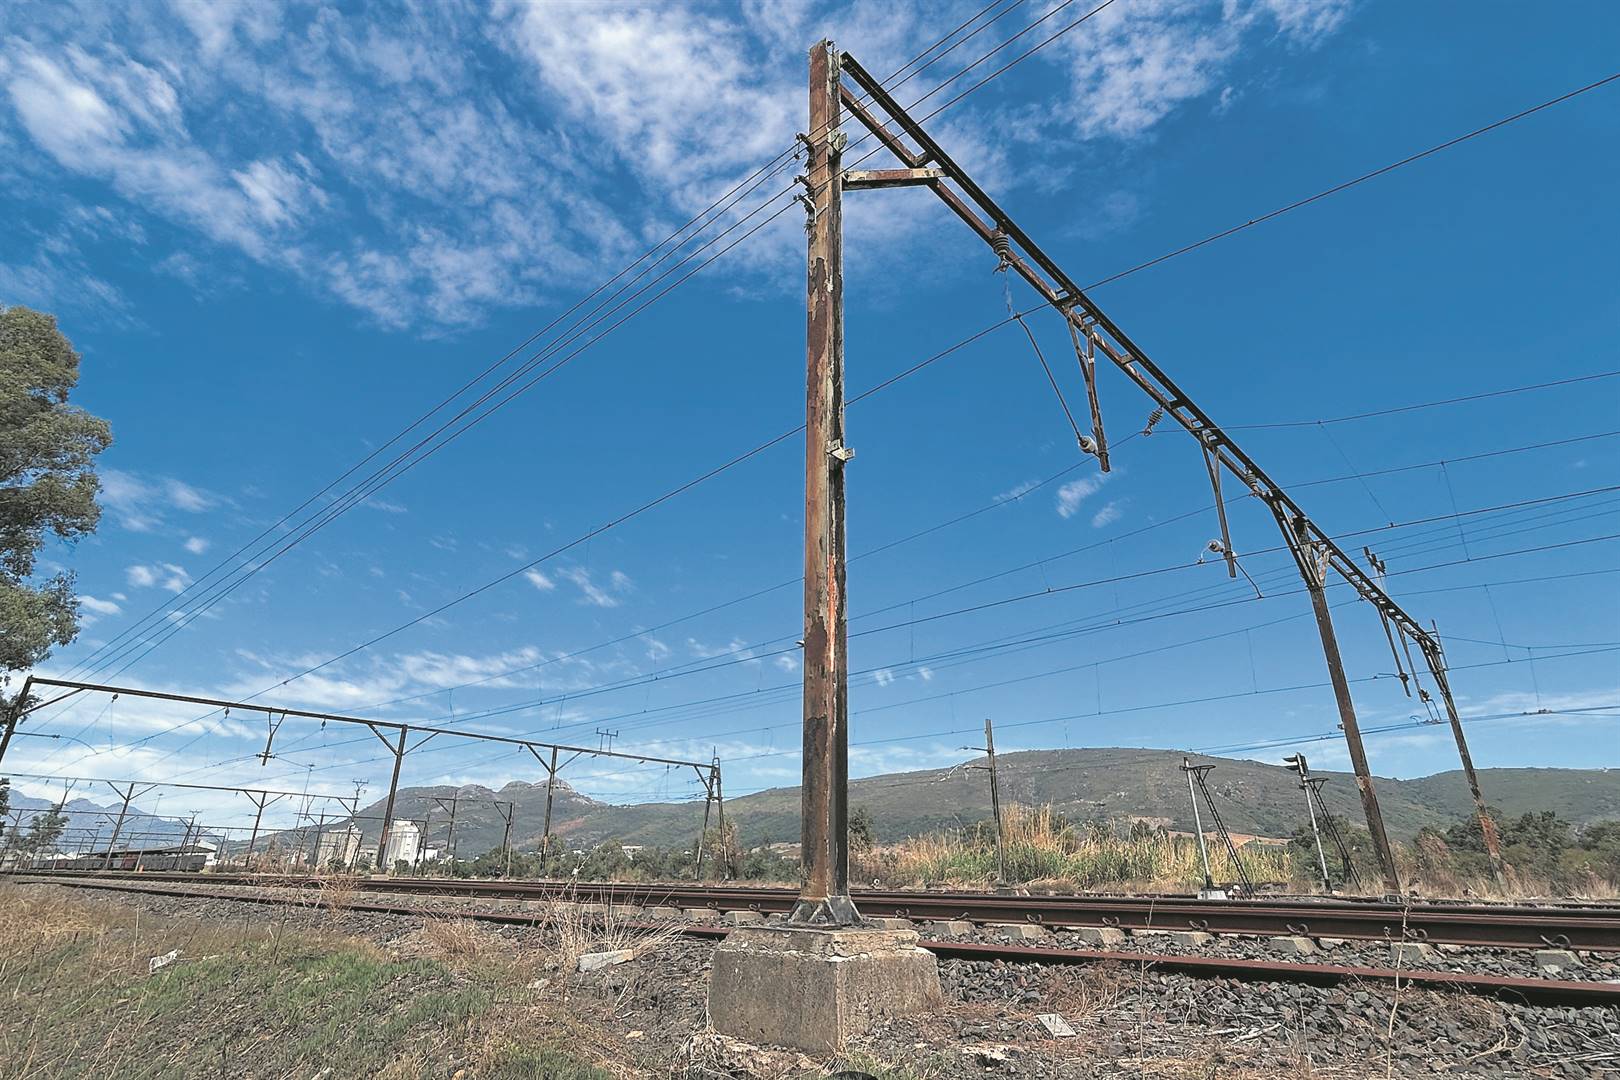 A 35-year-old man died after allegedly trying to steal overhead cables near the Dal Josaphat Train Station in Paarl on Sunday (17 March).Photo: Rasaad Adams